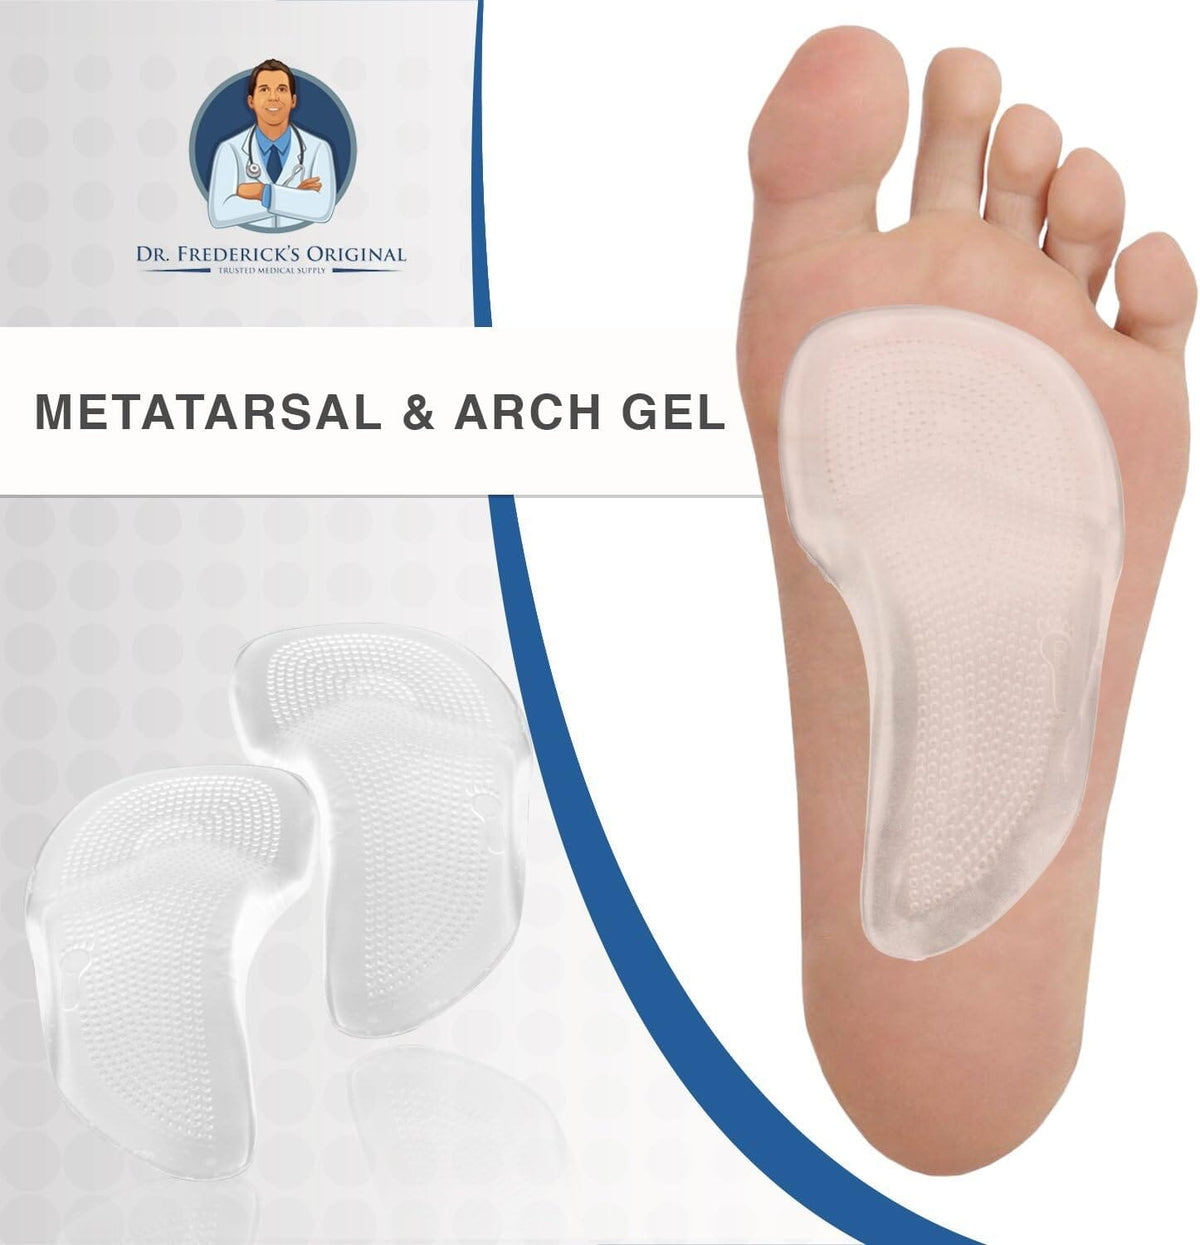 Dr. Frederick&#39;s Original Self-Adhesive Metatarsal and Arch Support Insole Gel Pads - 2 Pieces - Generous Ball of Foot Cushions for Arch Support, Plantar Fasciitis &amp; More Foot Pain Dr. Frederick&#39;s Original 